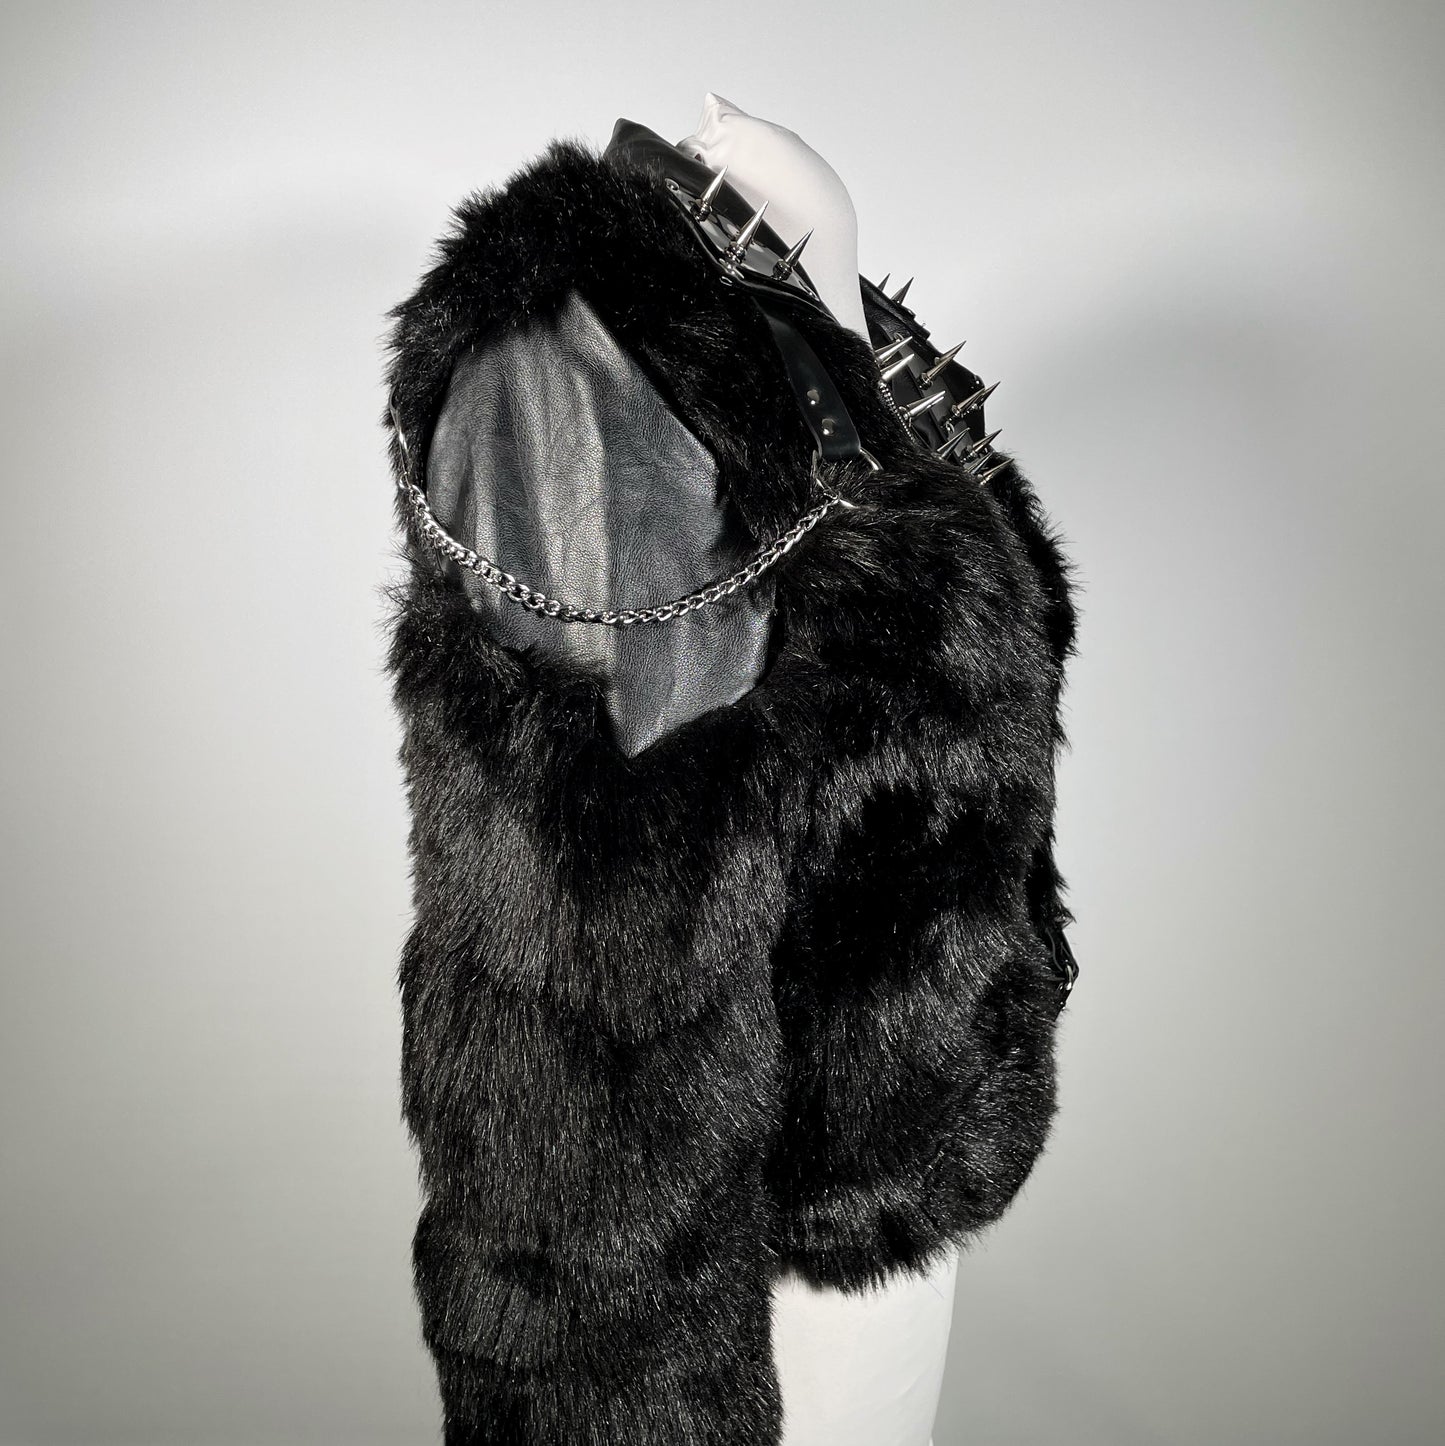 Black Pleather and Faux Fur Jacket with PVC Spiked Lapels and Harness Shoulders